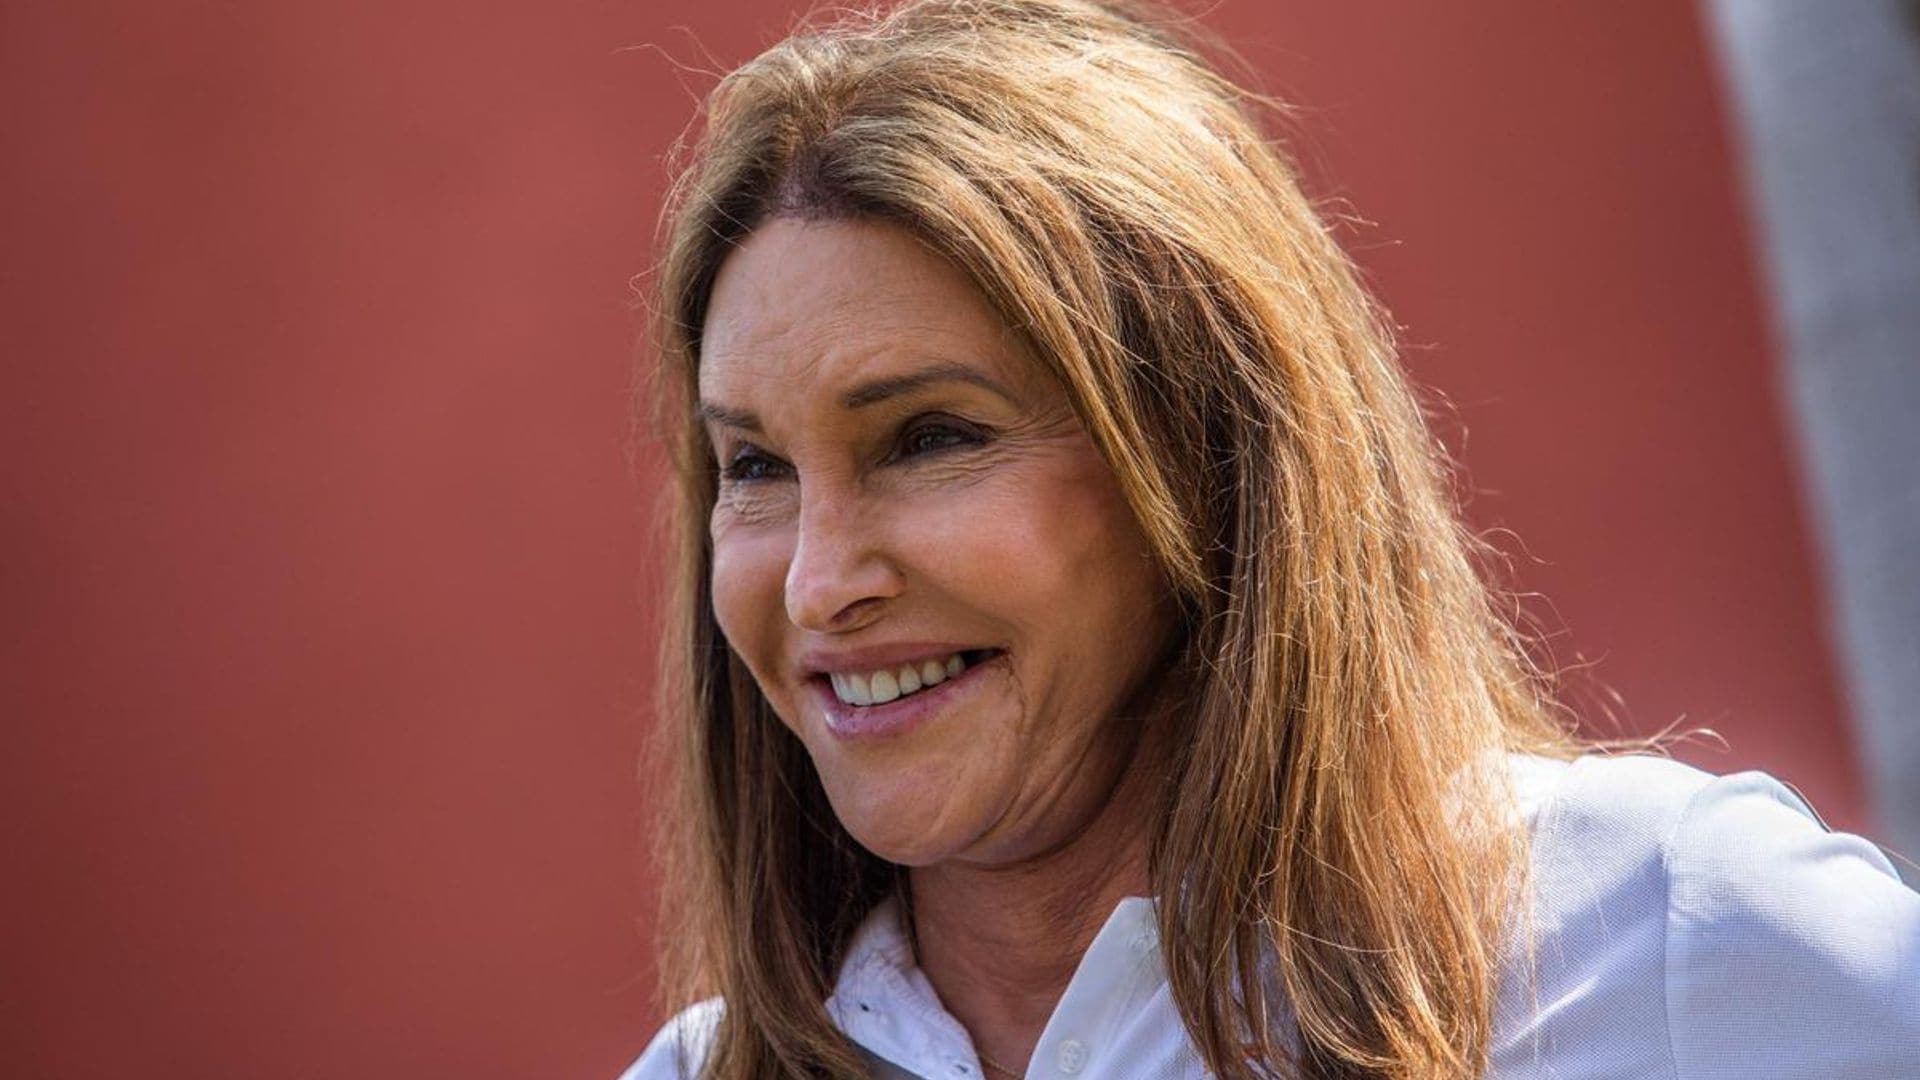 Caitlyn Jenner is ‘happy’ about the Kardashians’ upcoming Hulu show